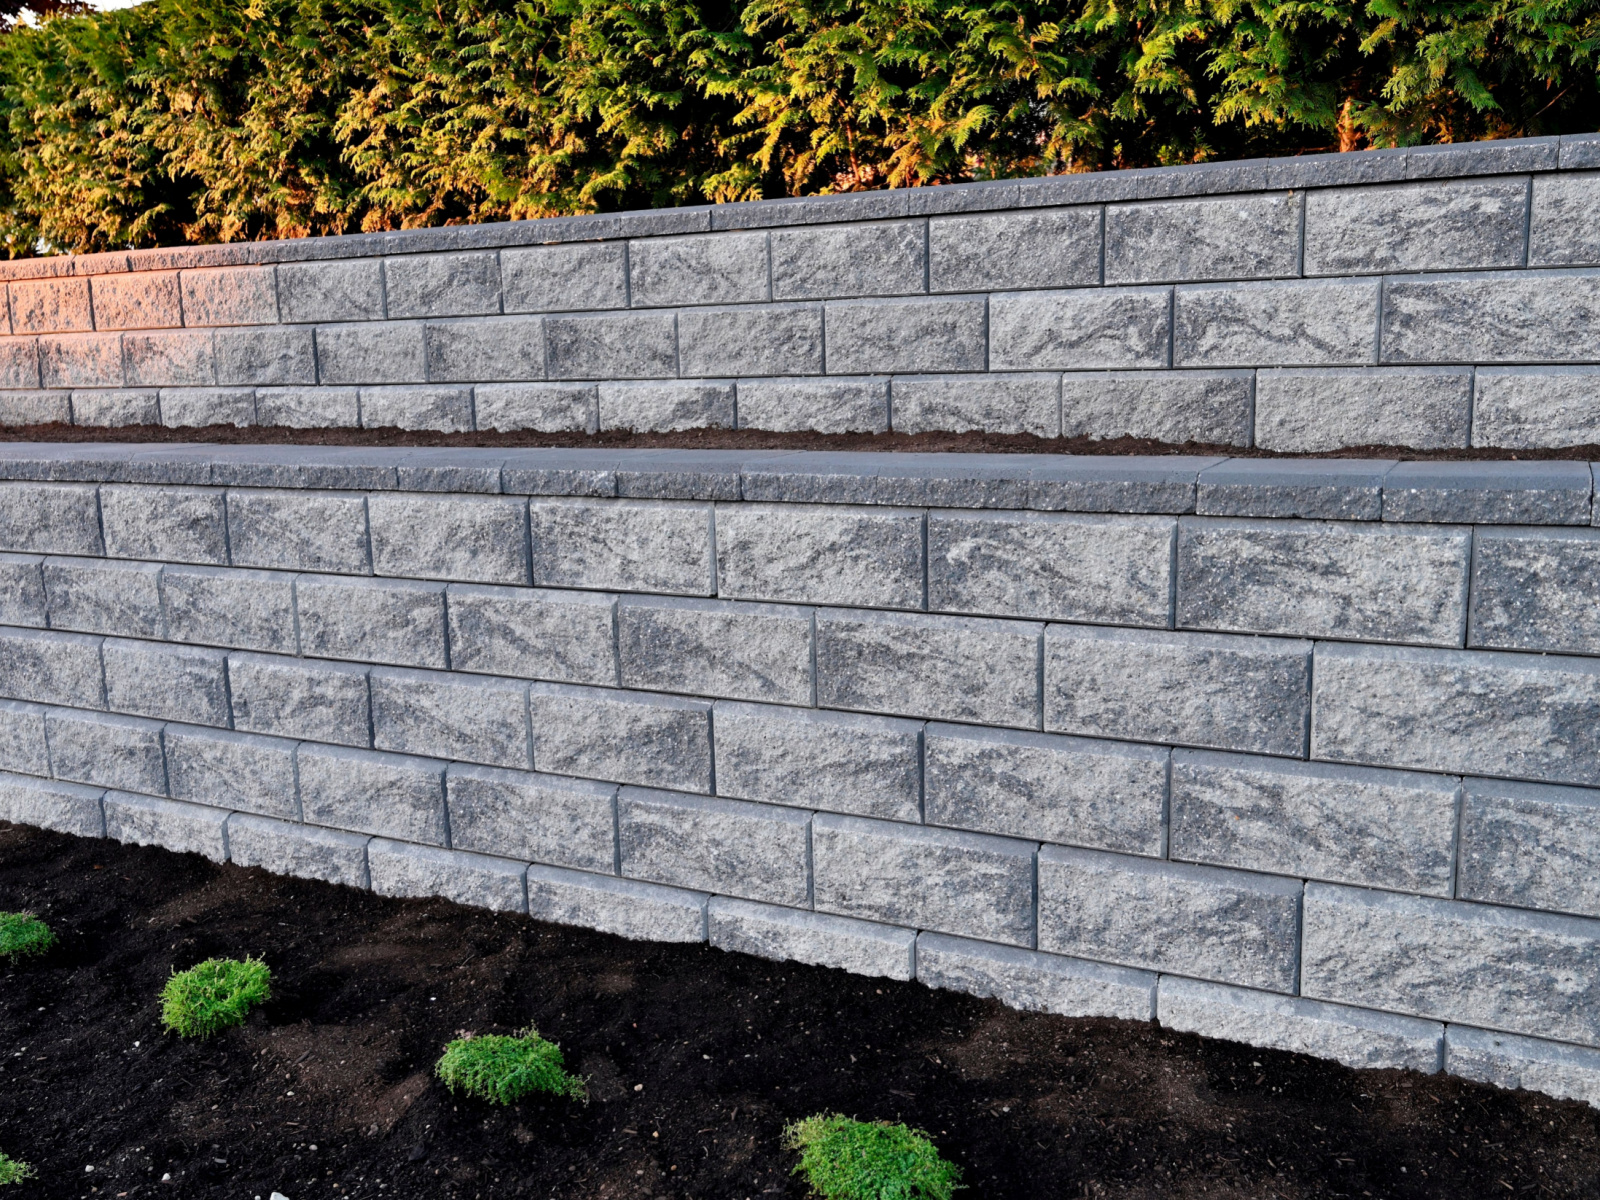 Add to Your Property with Retaining Walls and Rockery Walls